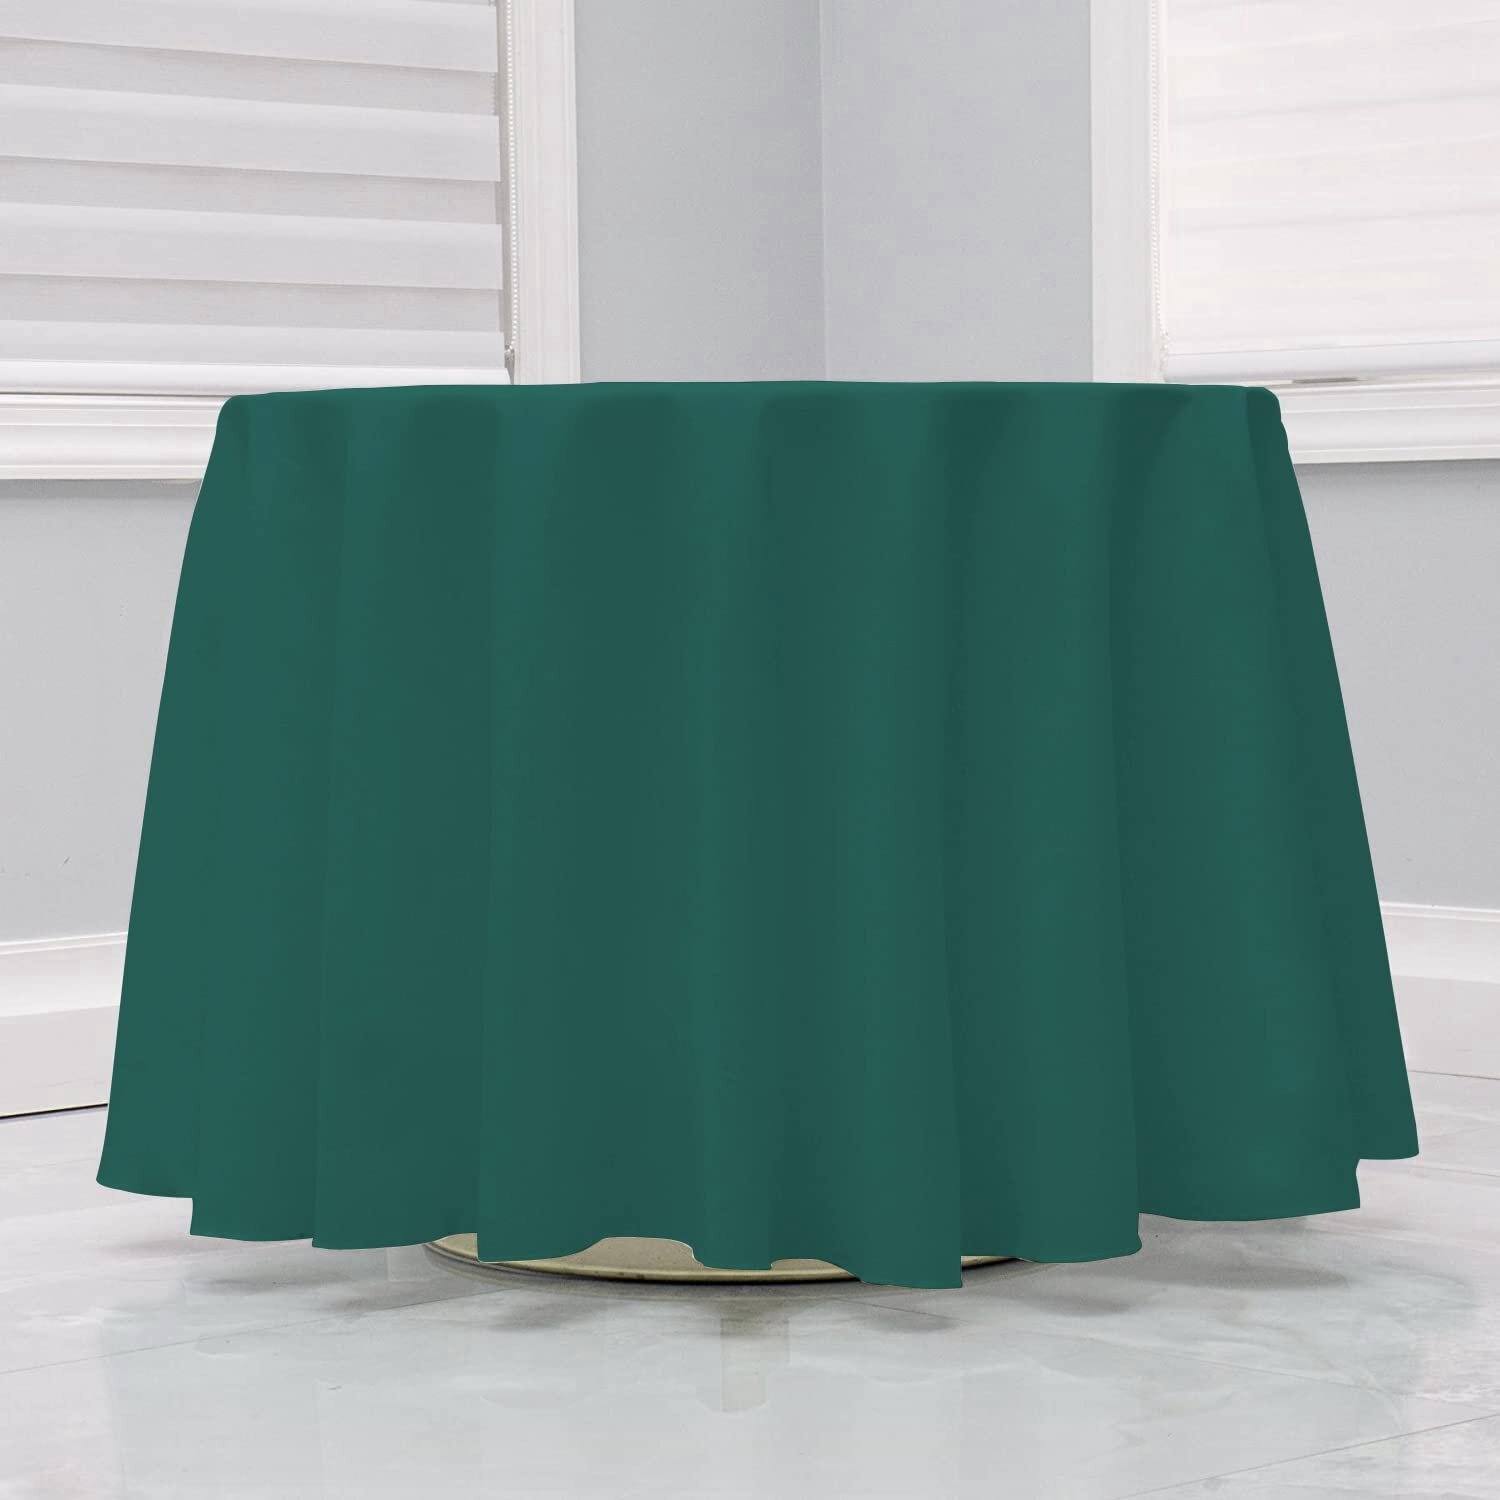 54" Inch Red Round Tablecloth For Polyester Fabric For Catering Party 